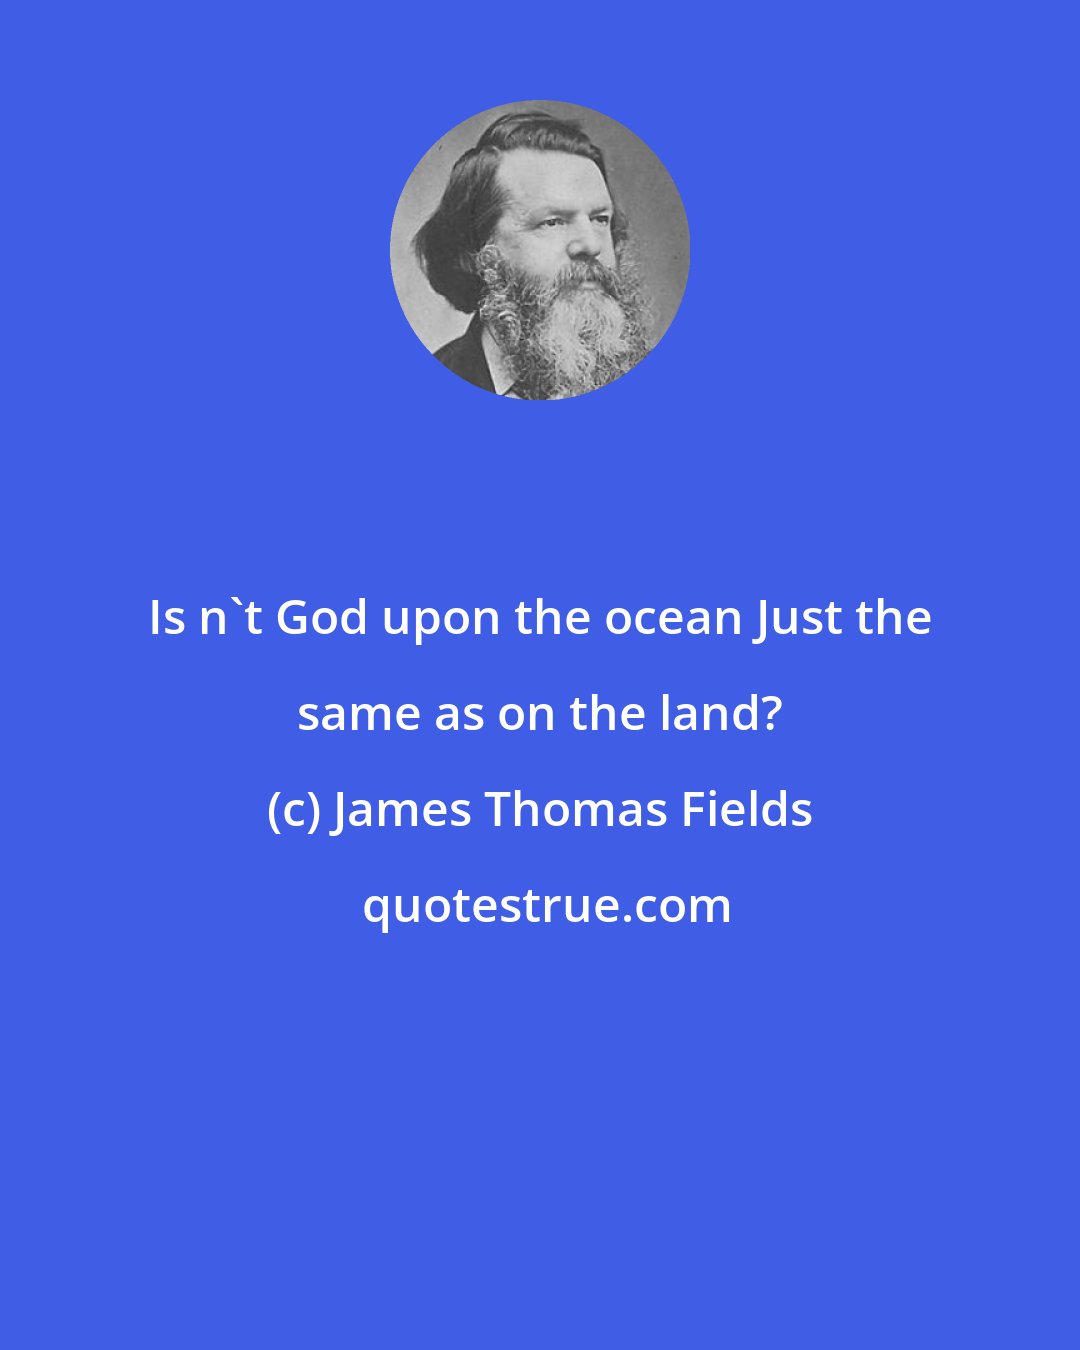 James Thomas Fields: Is n't God upon the ocean Just the same as on the land?